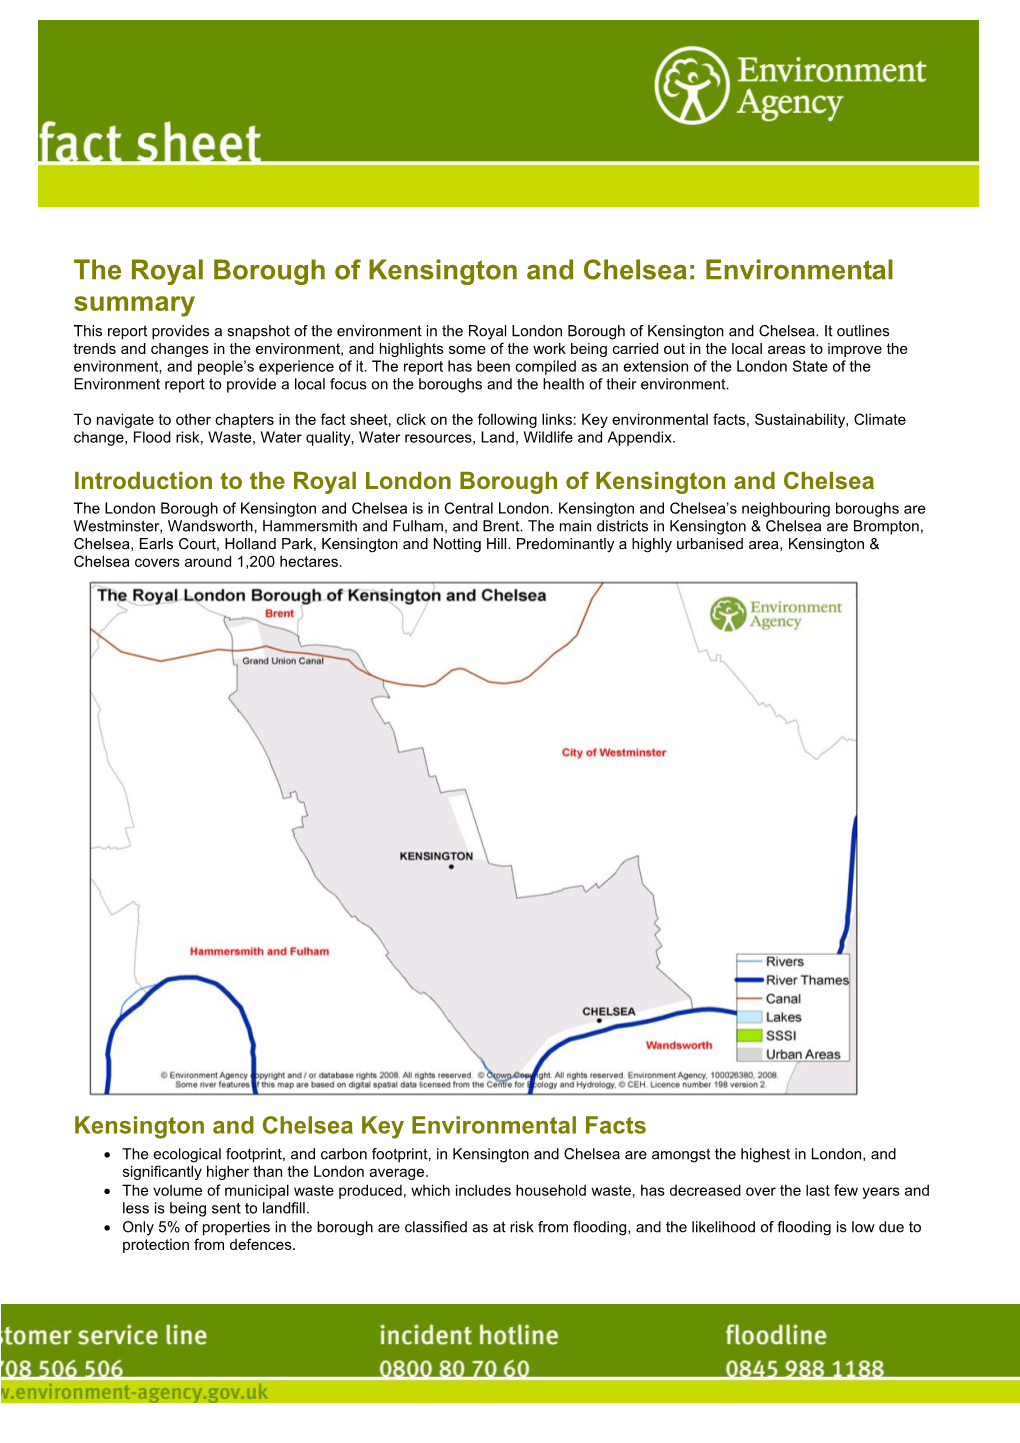 Environmental Summary This Report Provides a Snapshot of the Environment in the Royal London Borough of Kensington and Chelsea